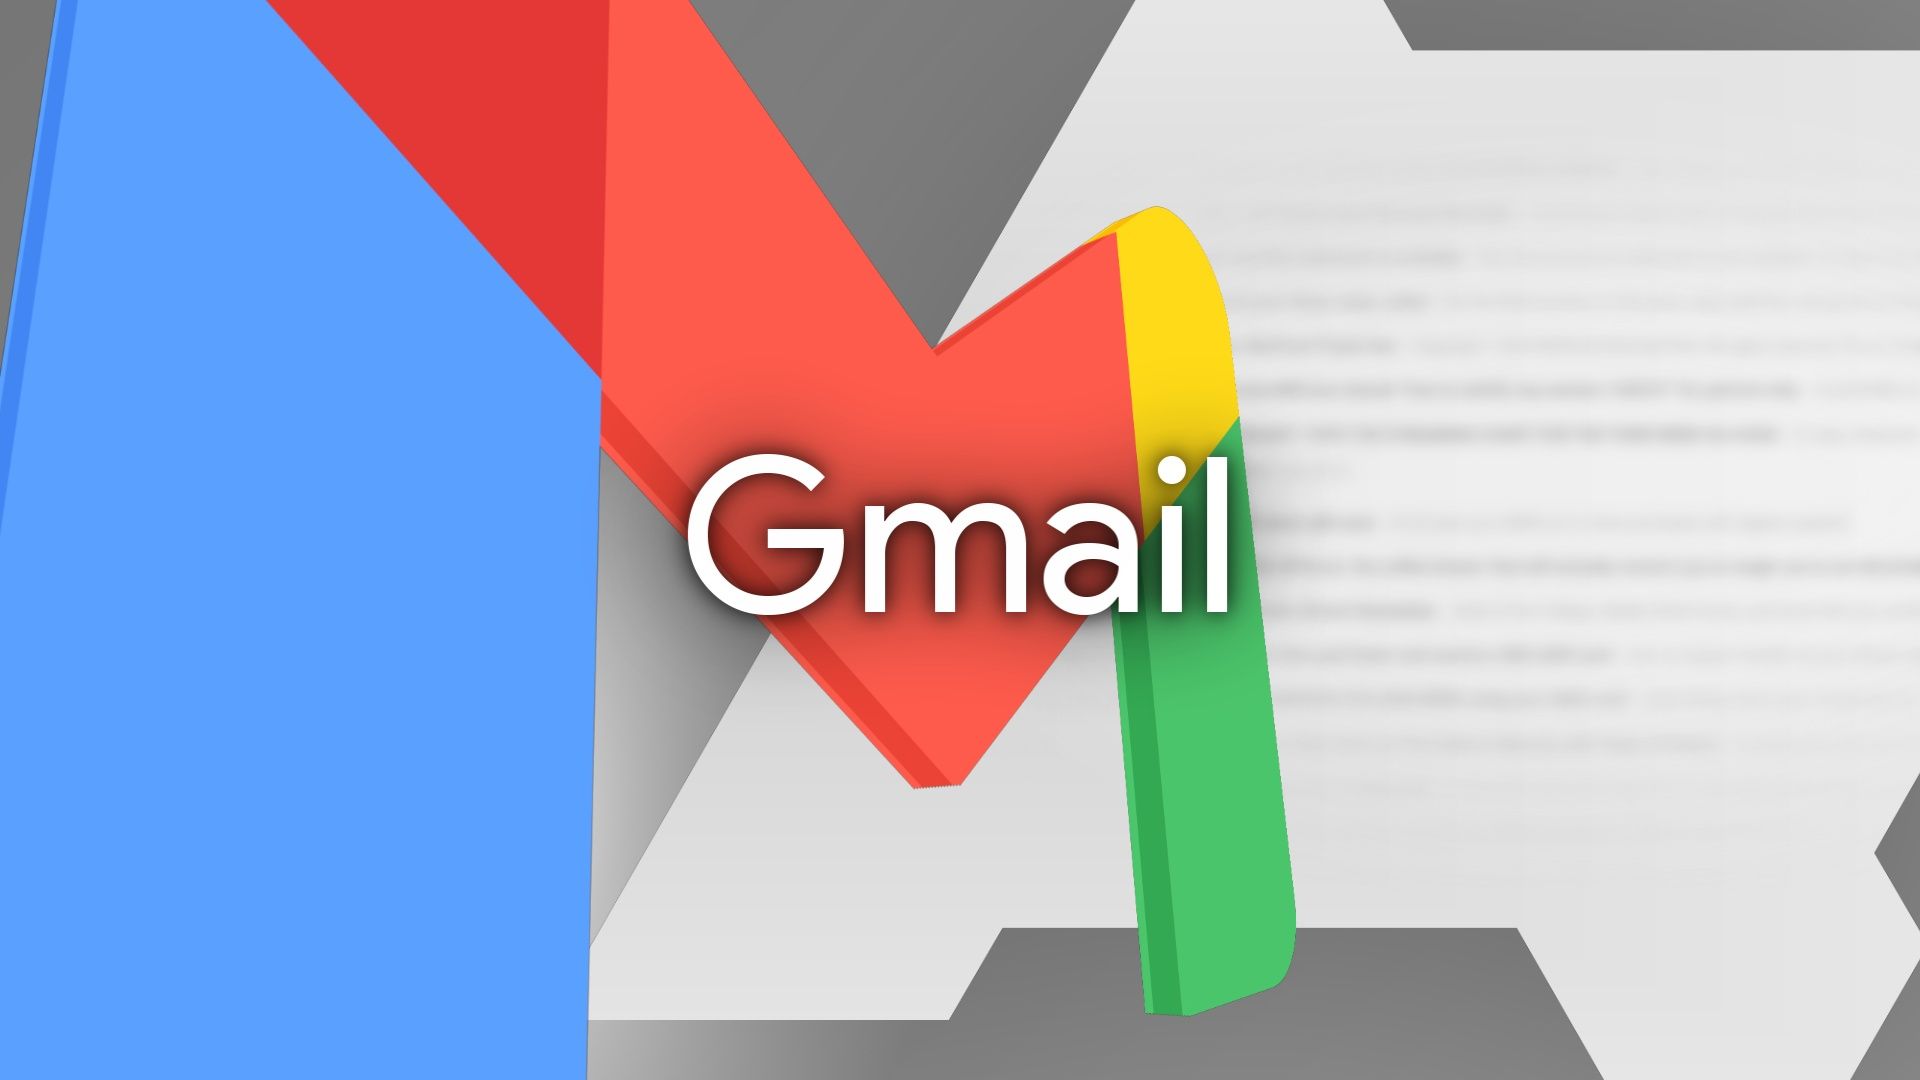 Gmail may soon replace your favorite package tracking apps for good